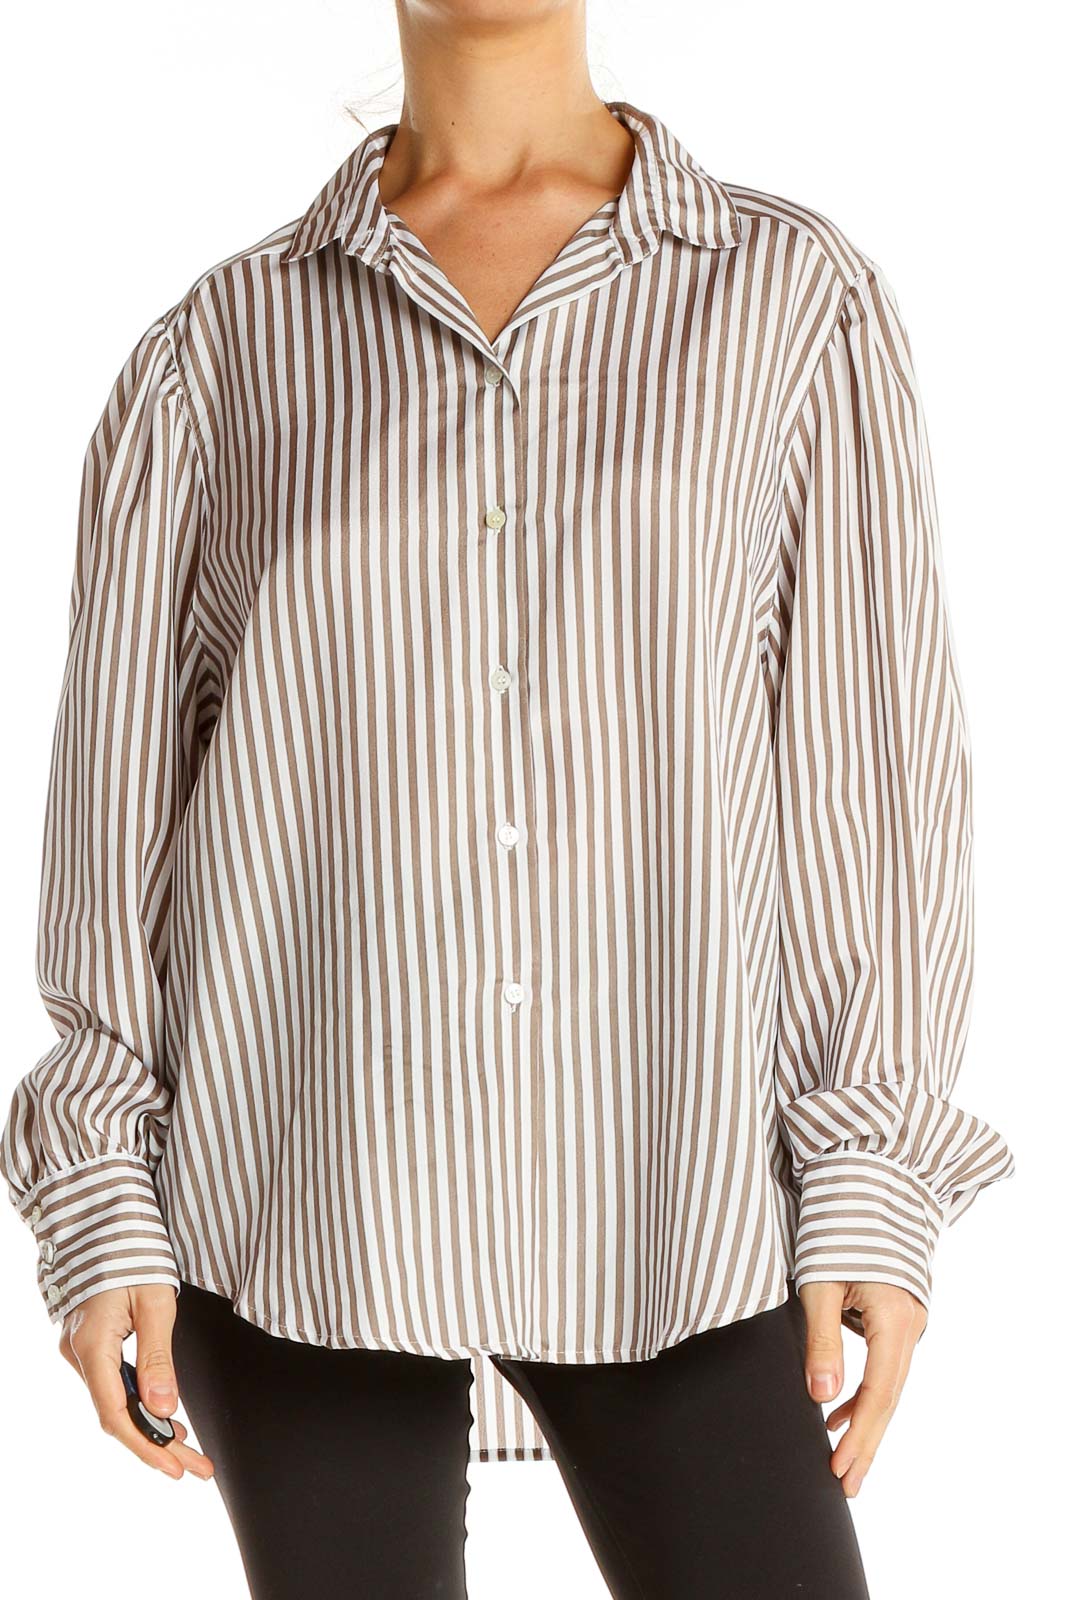 White Brown Striped Work Shirt Front